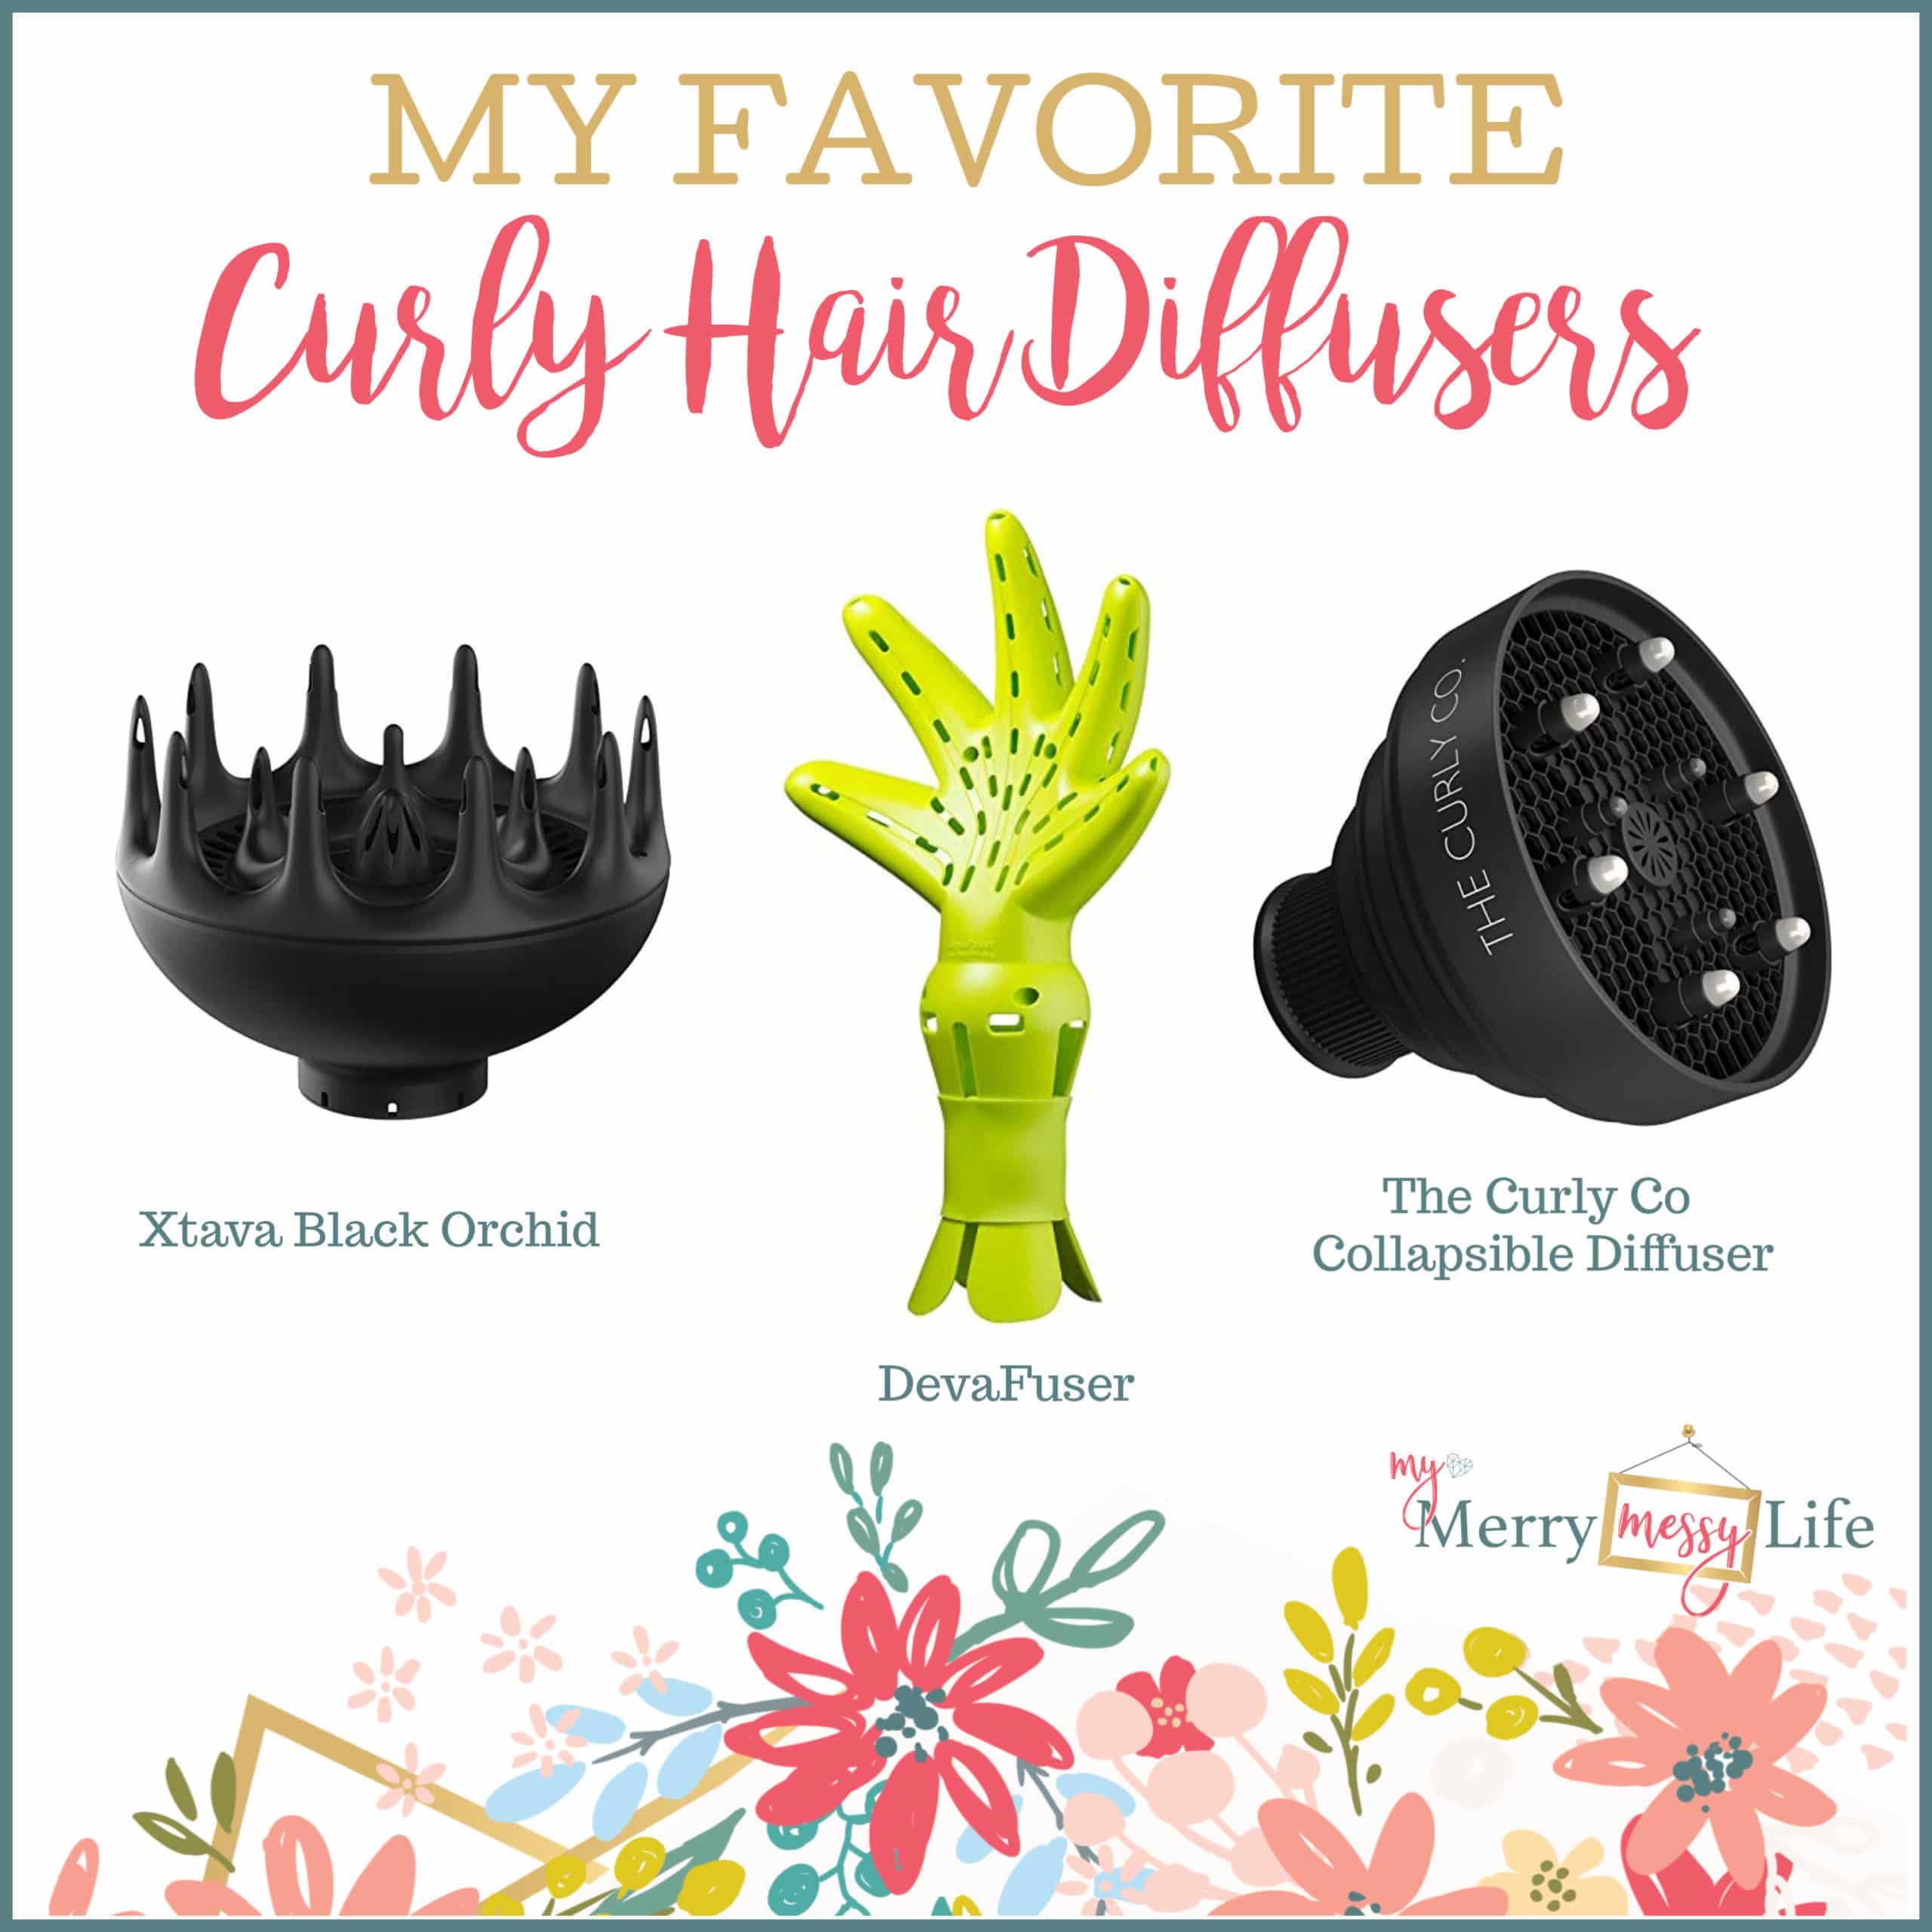 My Favorite Curly Hair Diffusers - the Xtava Black Orchid, DevaFuser, and The Curly Co. Collapsible Diffuser (for traveling)